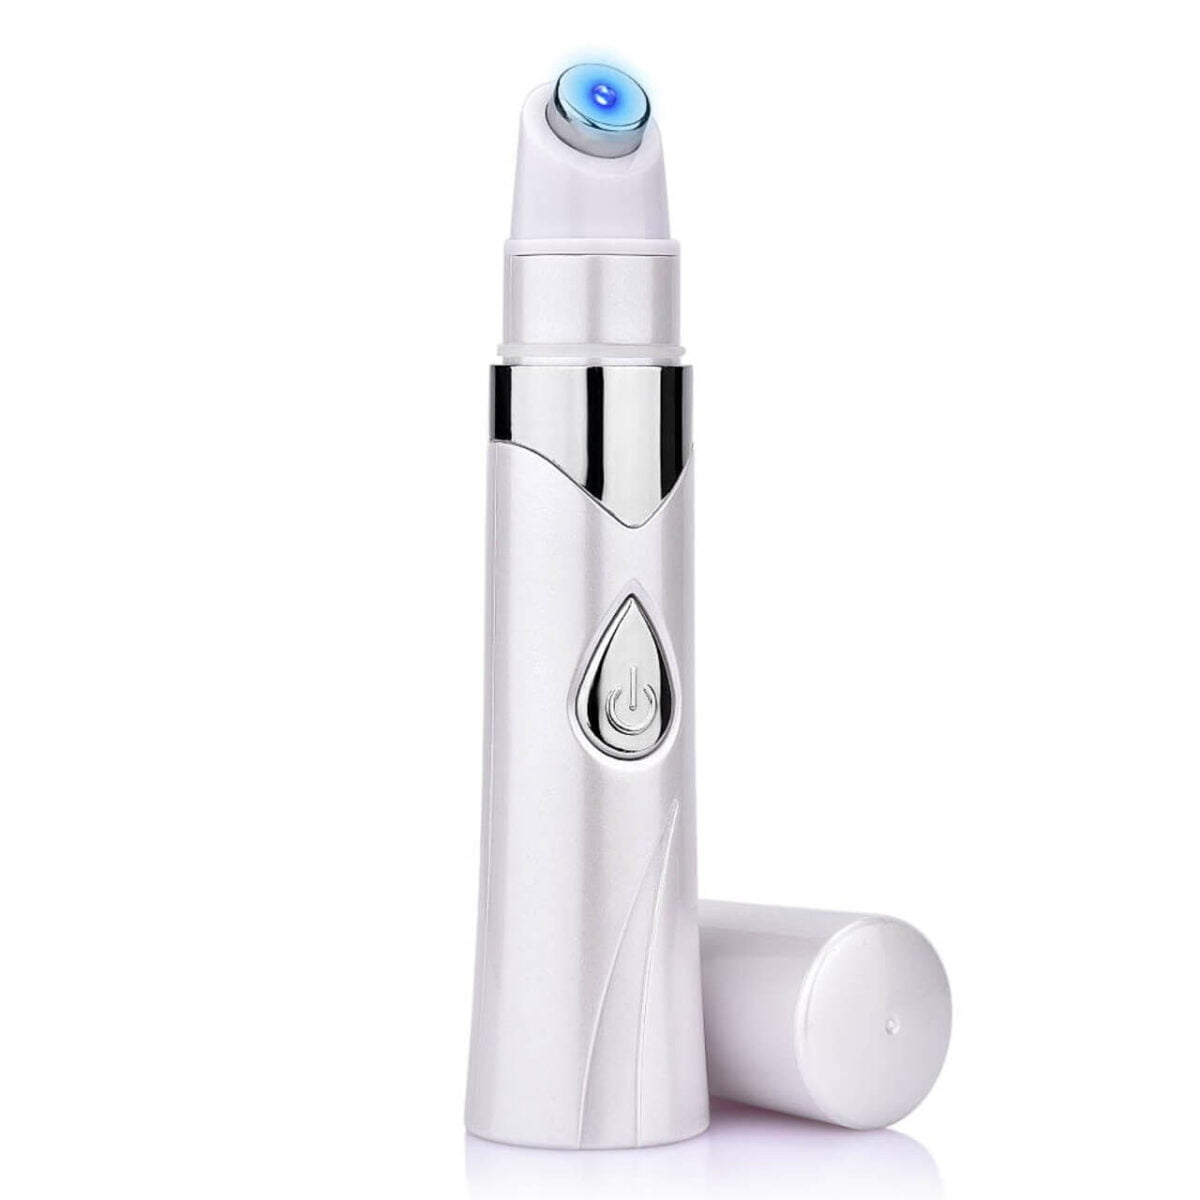 Blue Light Treatment Pen Anti-varicose Veins And Face Acne Removal